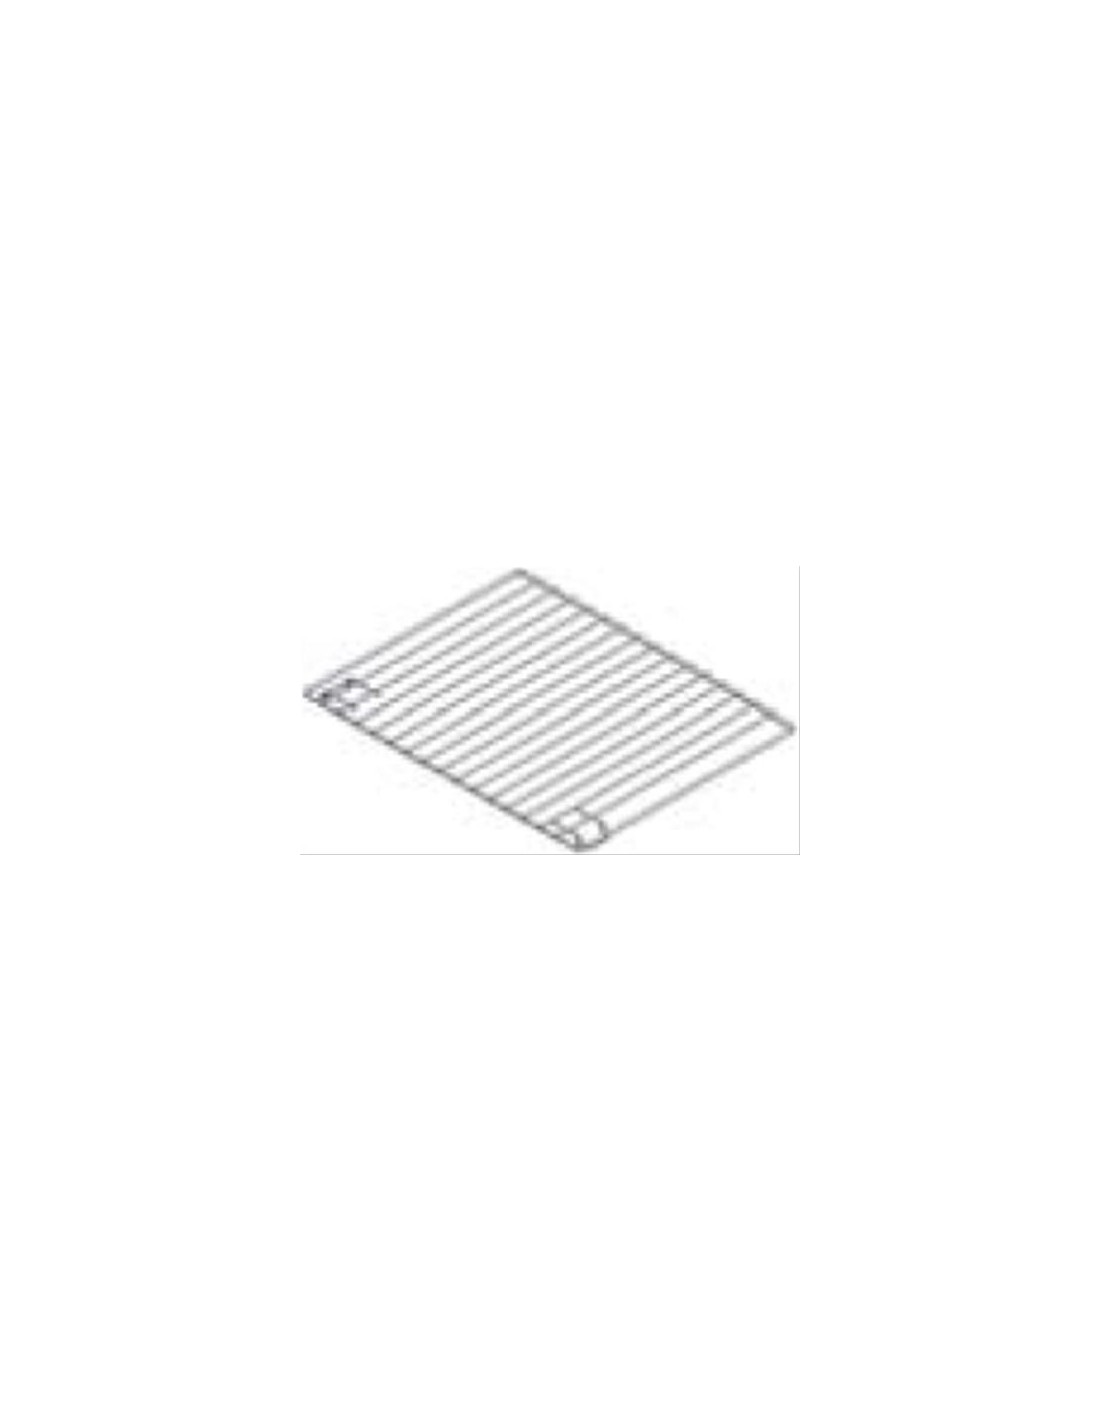 Horizontal grill in AISI 304 - cm 43.4 x 34 x 1.6 h - For ovens 42.9 x 34.5